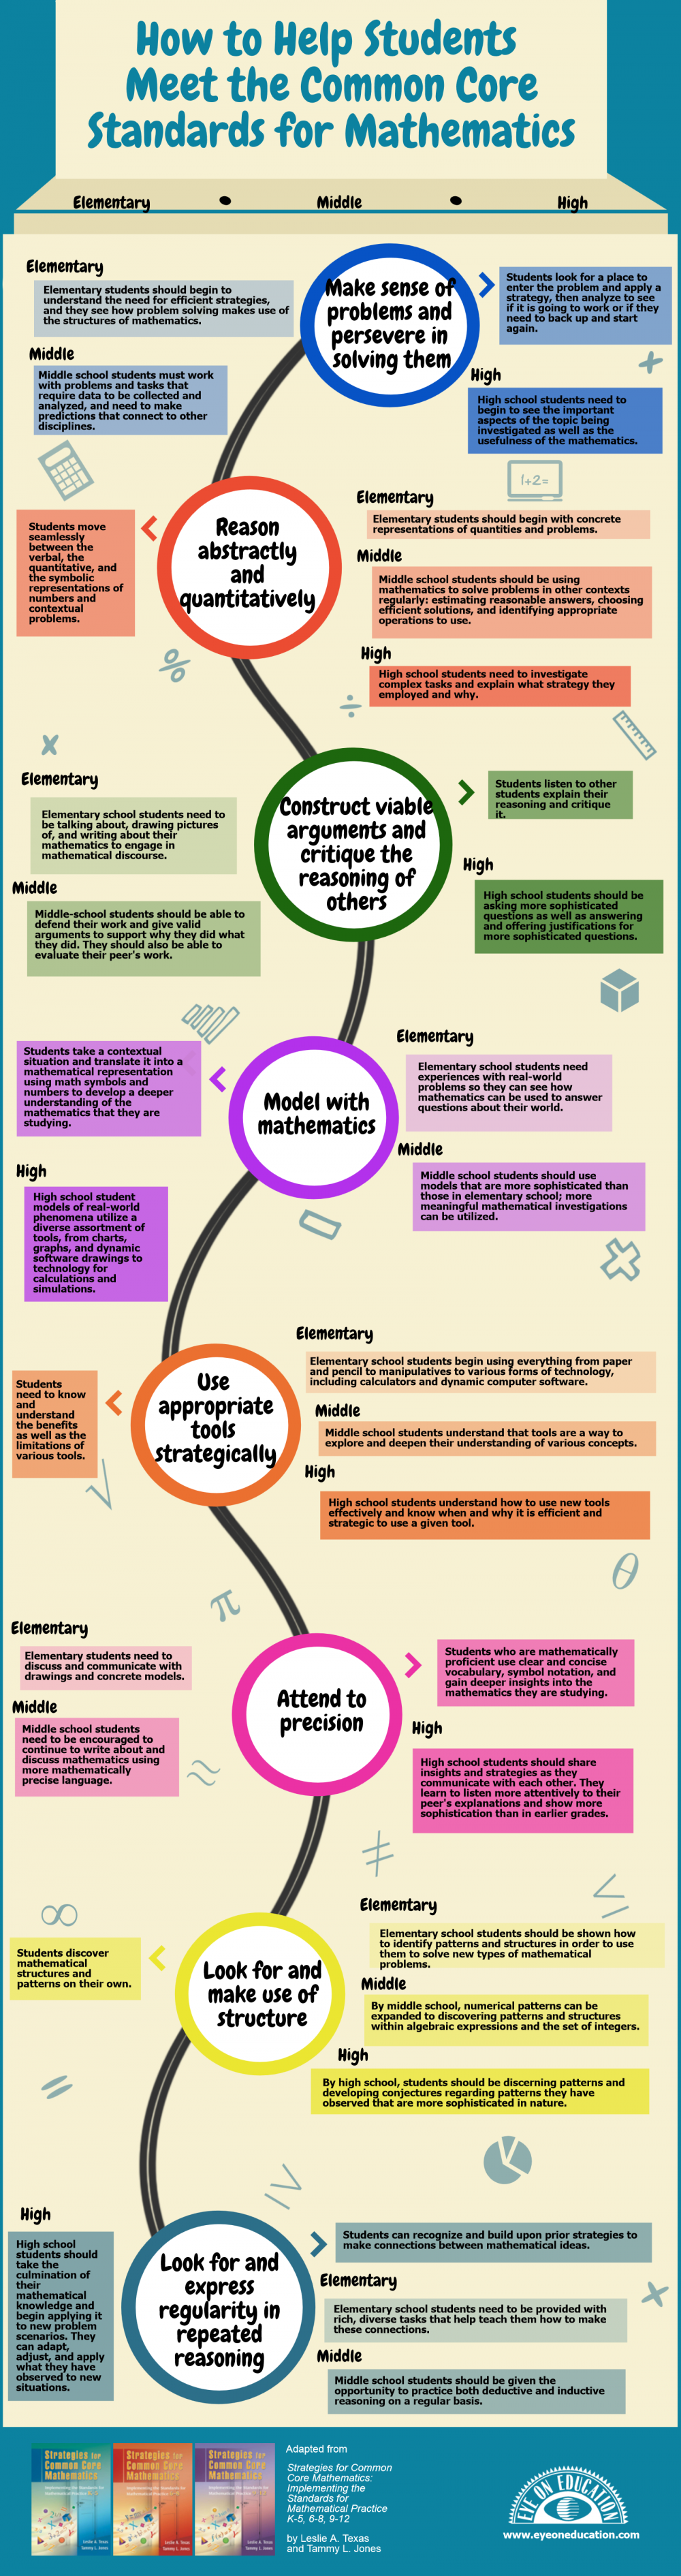 How-to-Help-Students-Meet-the-CCSS-for-Math-Infographic